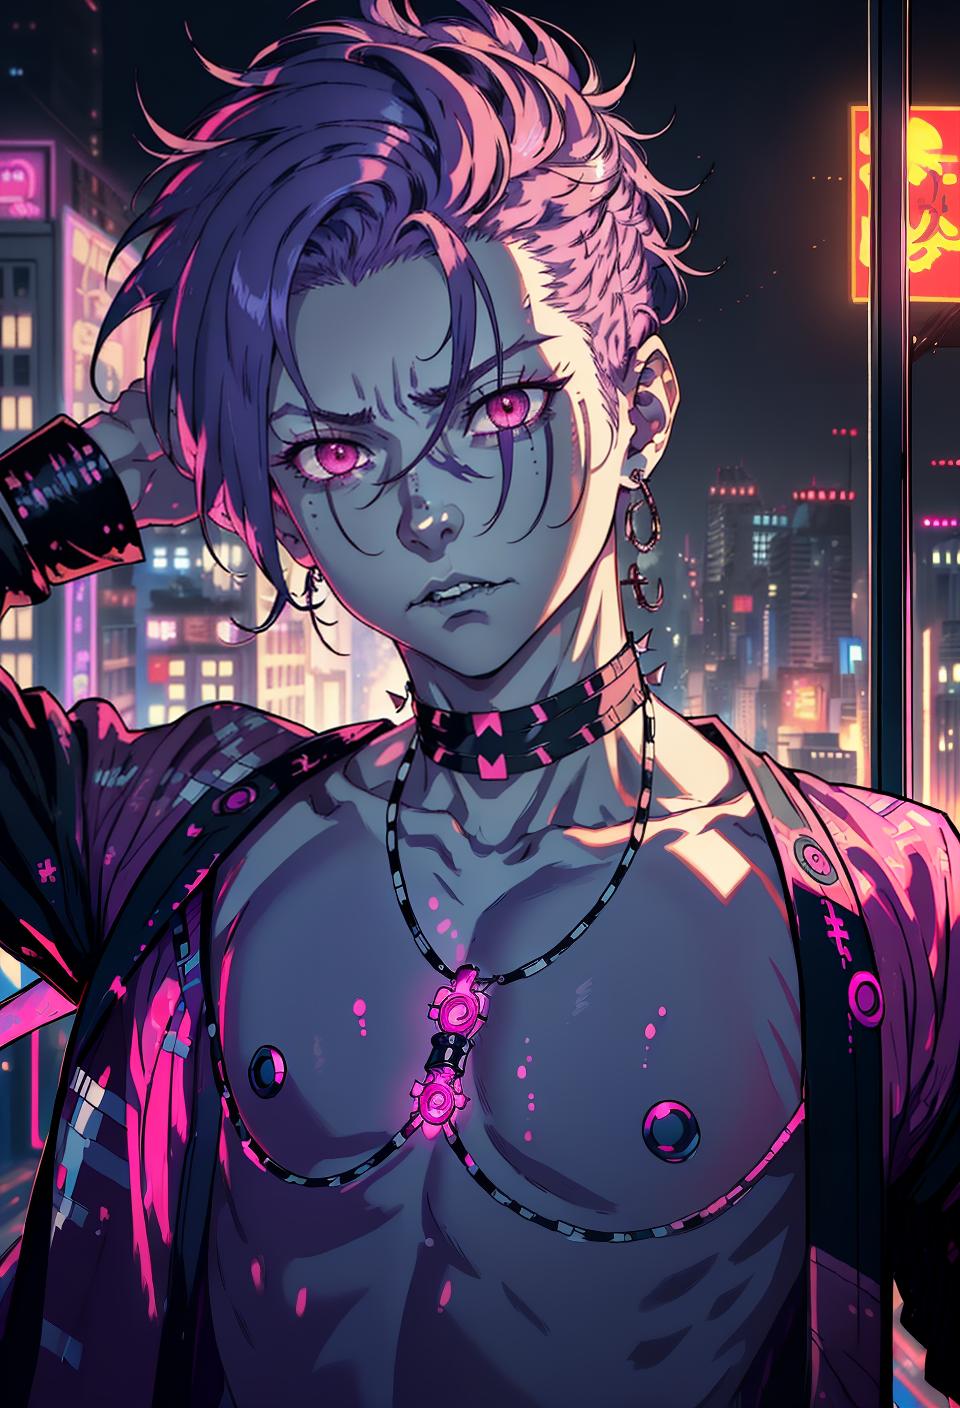  ((trending, highres, masterpiece, cinematic shot)), 1boy, mature, male tribal clothes, rooftop scene, very short spiked purple hair, side locks hairstyle, large pink eyes, psychopath, crazy personality, sad expression, very pale skin, epic, clever